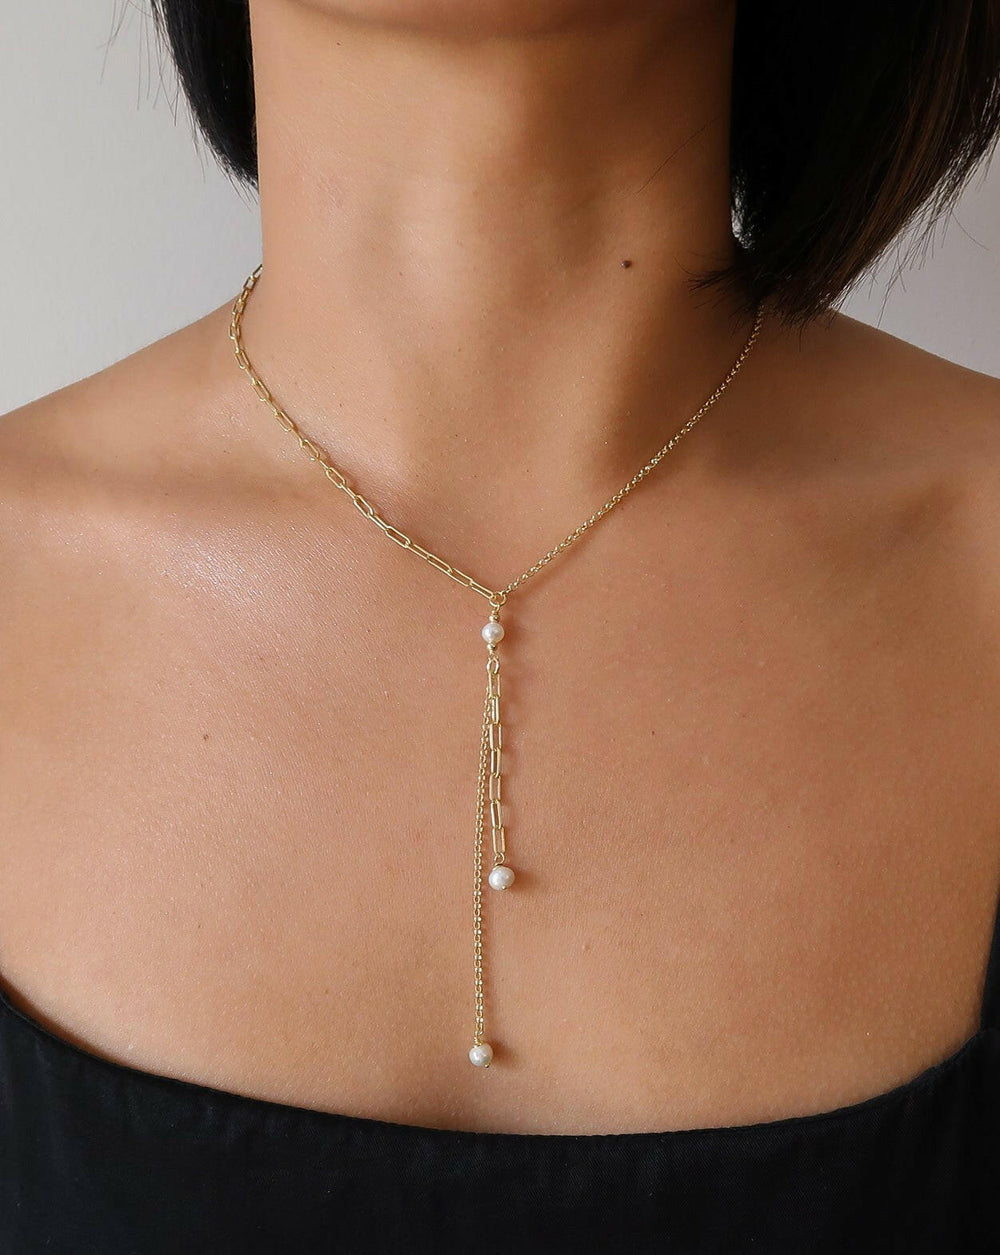 Gold and Pearl lariat necklace, y necklace